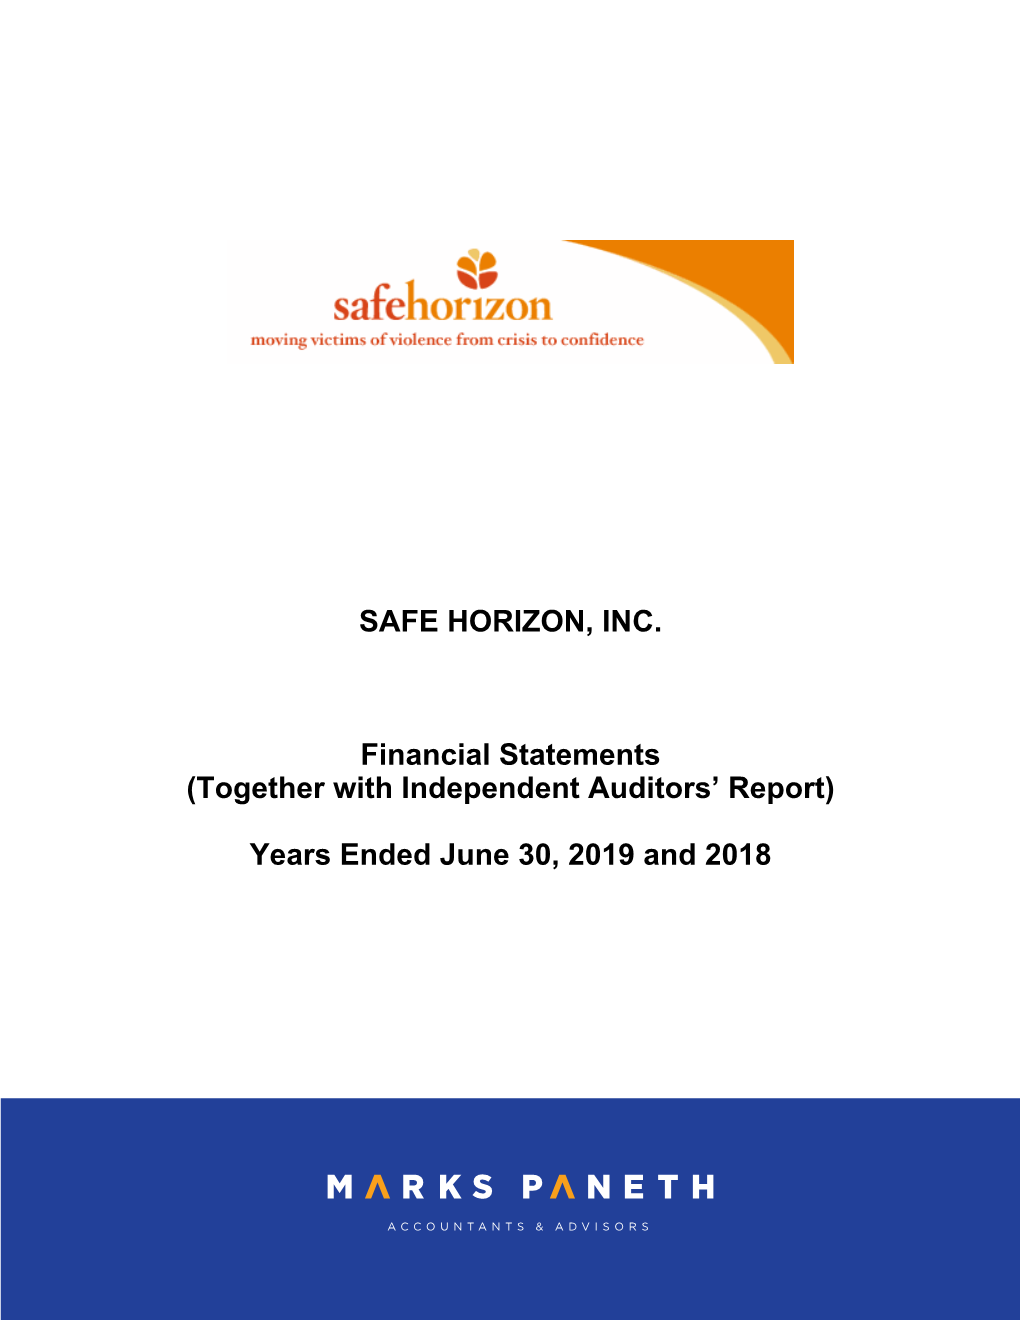 SAFE HORIZON, INC. Financial Statements (Together with Independent Auditors' Report) Years Ended June 30, 2019 and 2018